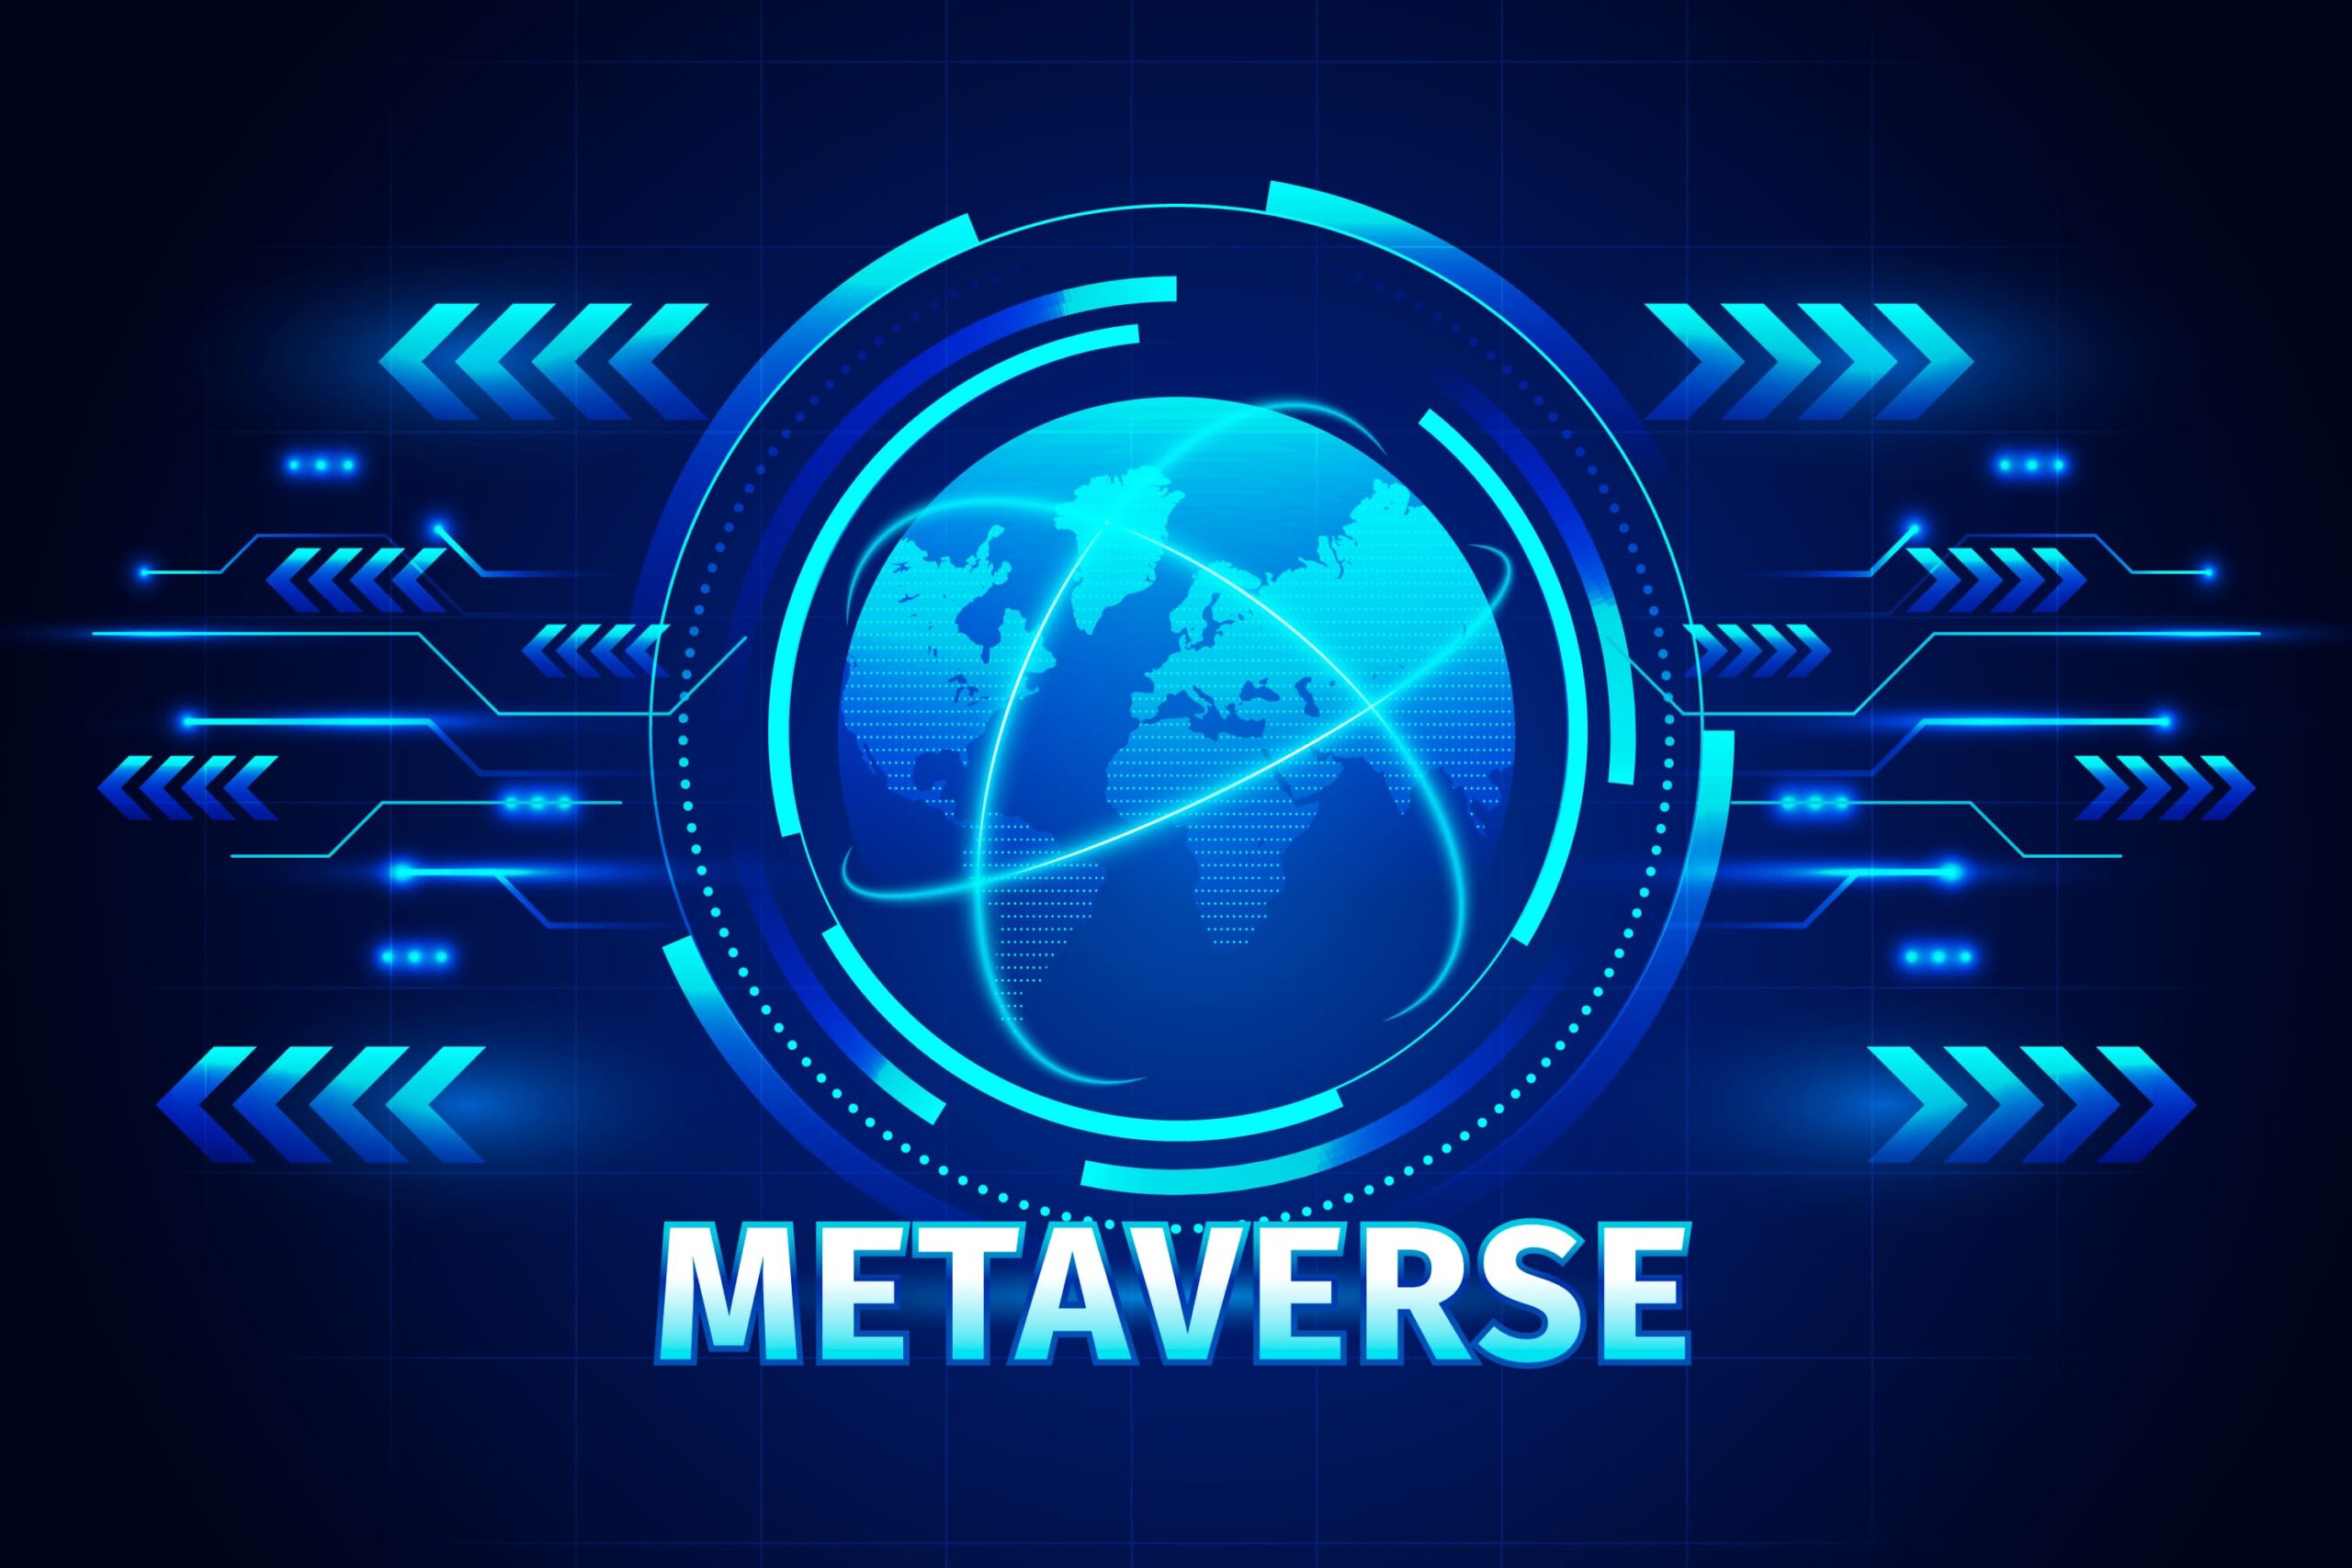 A Beginner's Guide to the Metaverse | What You Need to Know